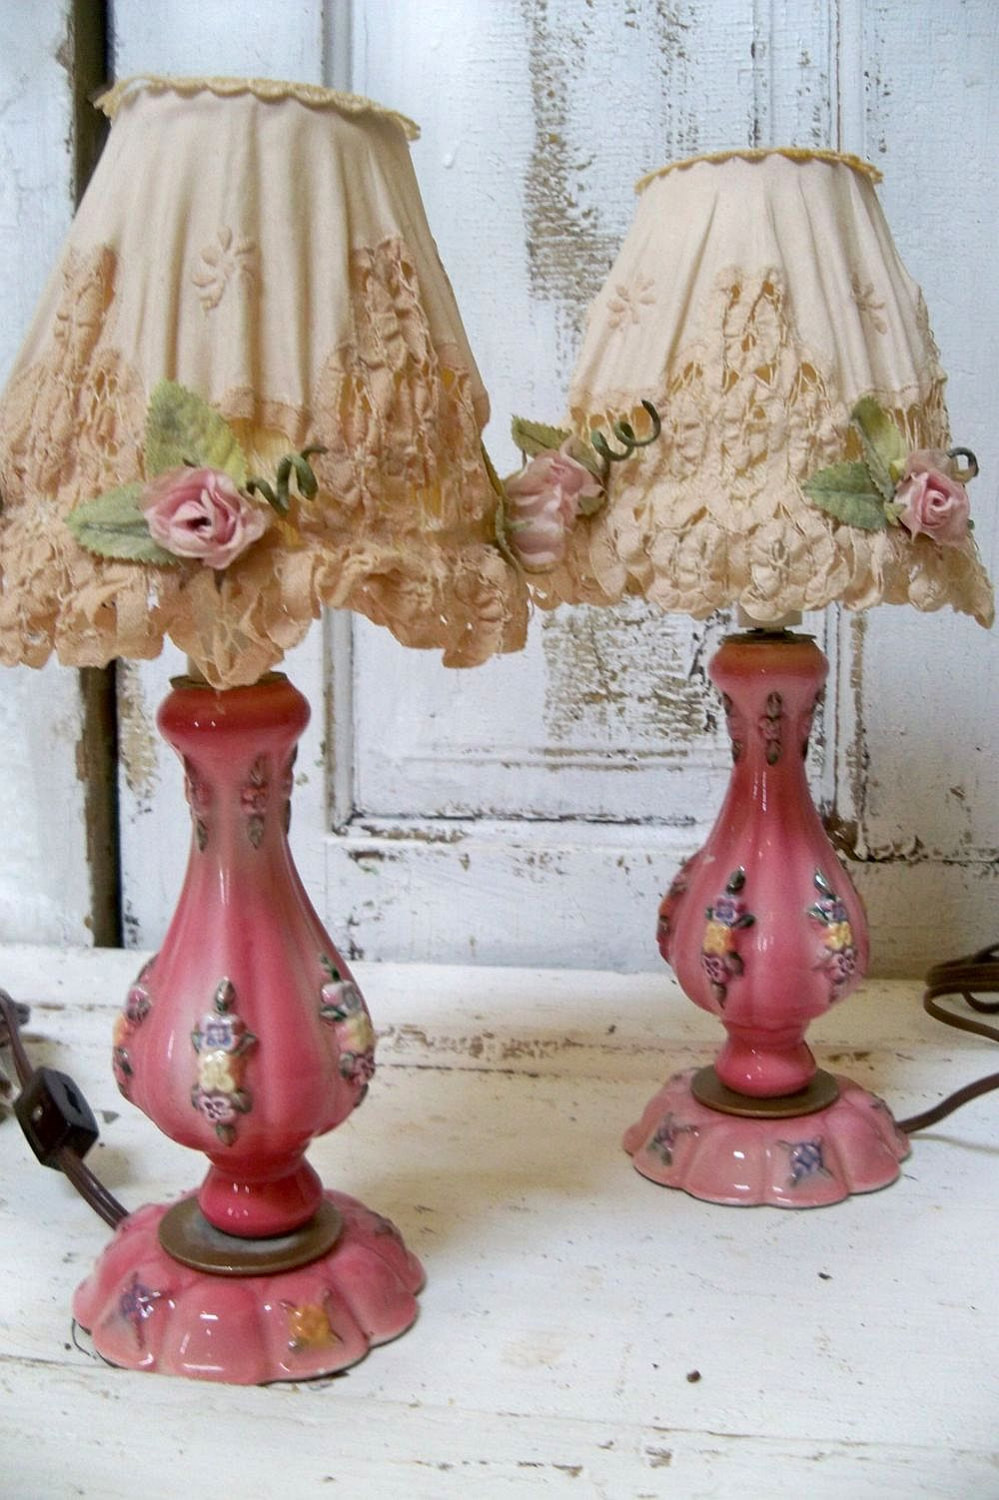 Shabby Chic Bedroom Lamps
 Shabby chic pink lamp set with embellished shades vintage